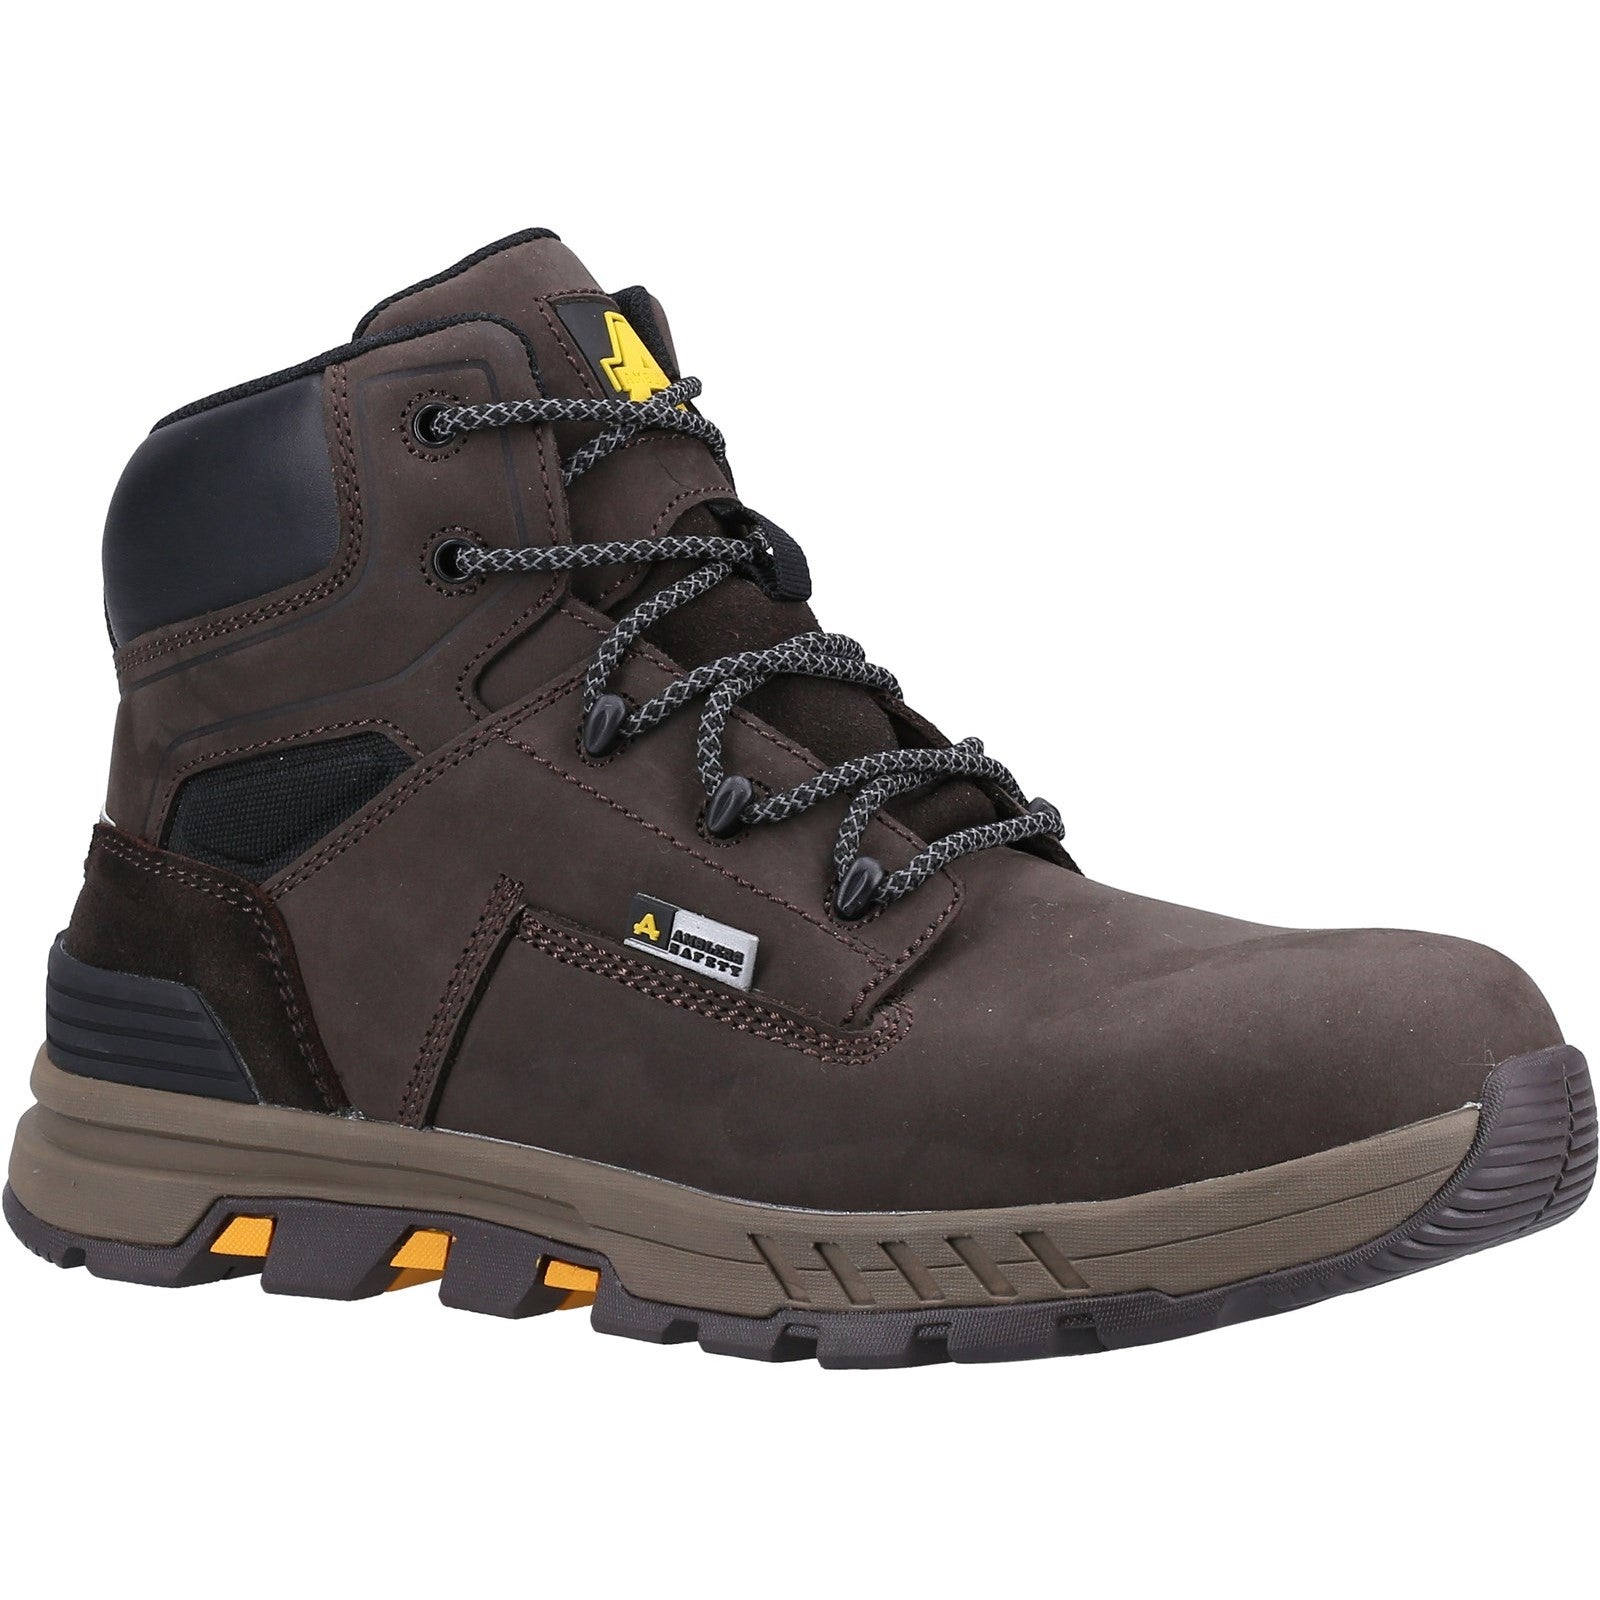 Amblers 261 Safety Boots - Brown